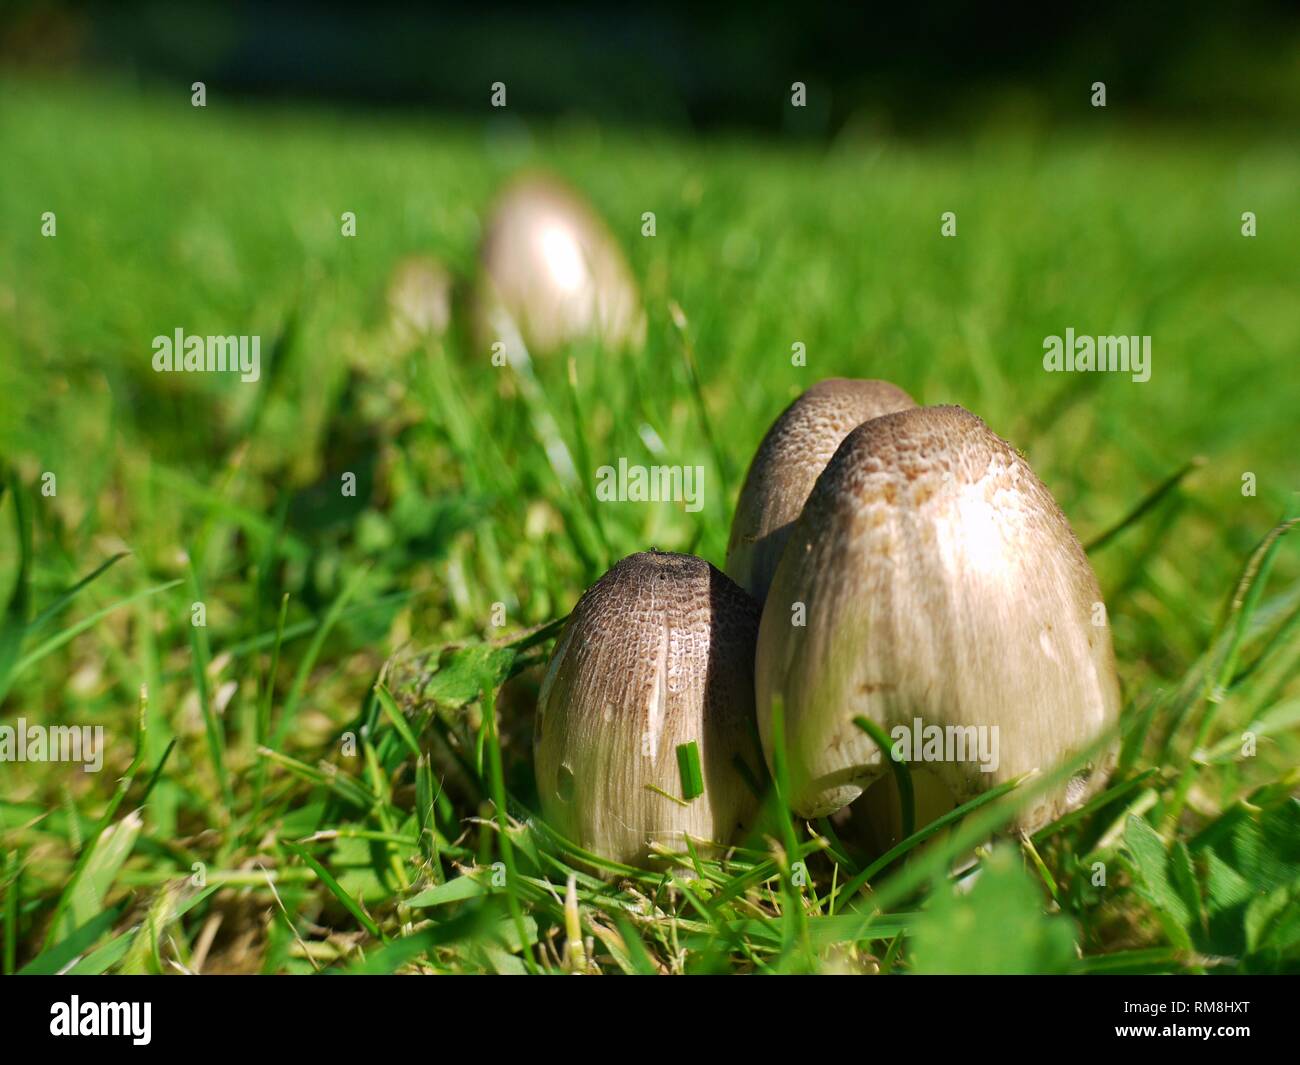 A macro image of the Common Inkcap, Coprinus atramentarius, which is poisonous when mixed with alcohol, inducing a rapid and severe hangover. Stock Photo